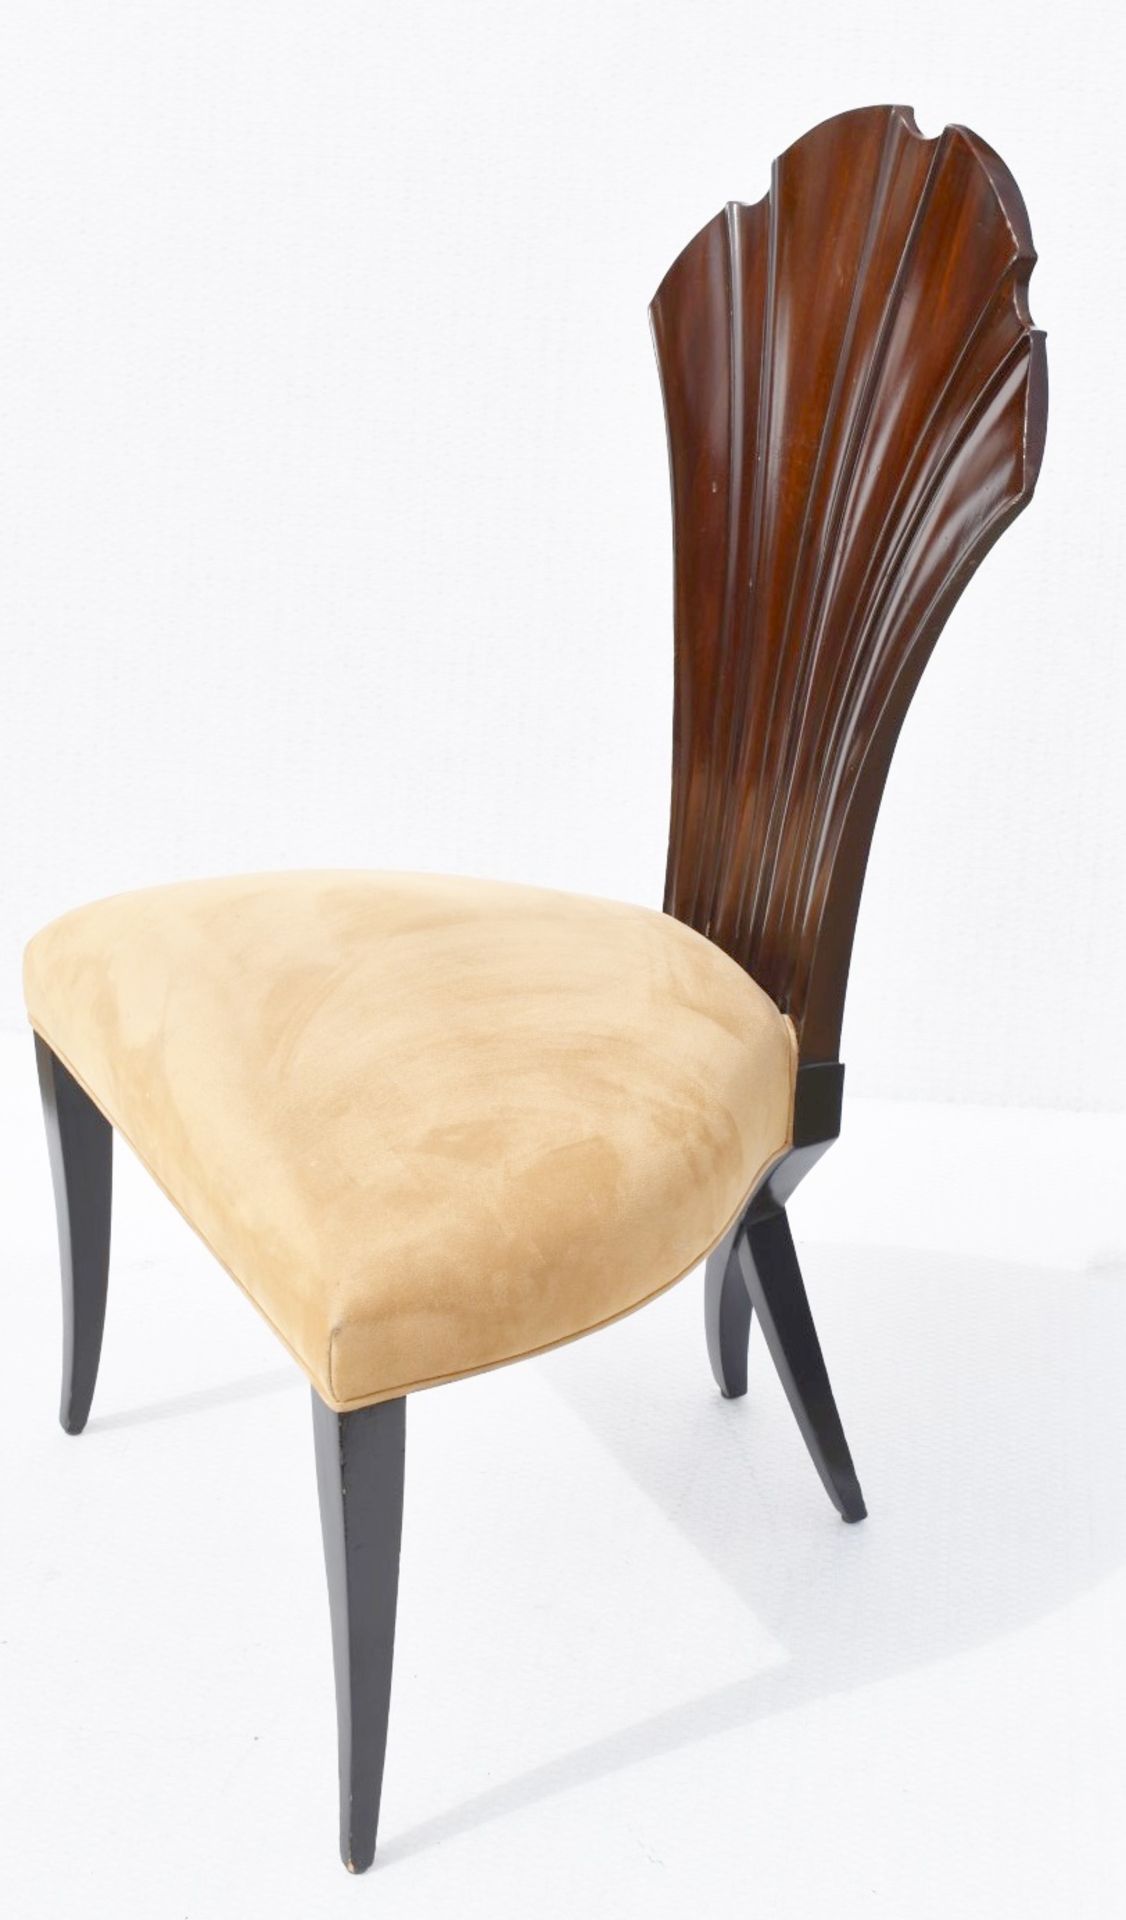 4 x CHRISTOPHER GUY 'La Croisette' Luxury Hand-carved Solid Mahogany Designer Dining Chairs - - Image 2 of 13